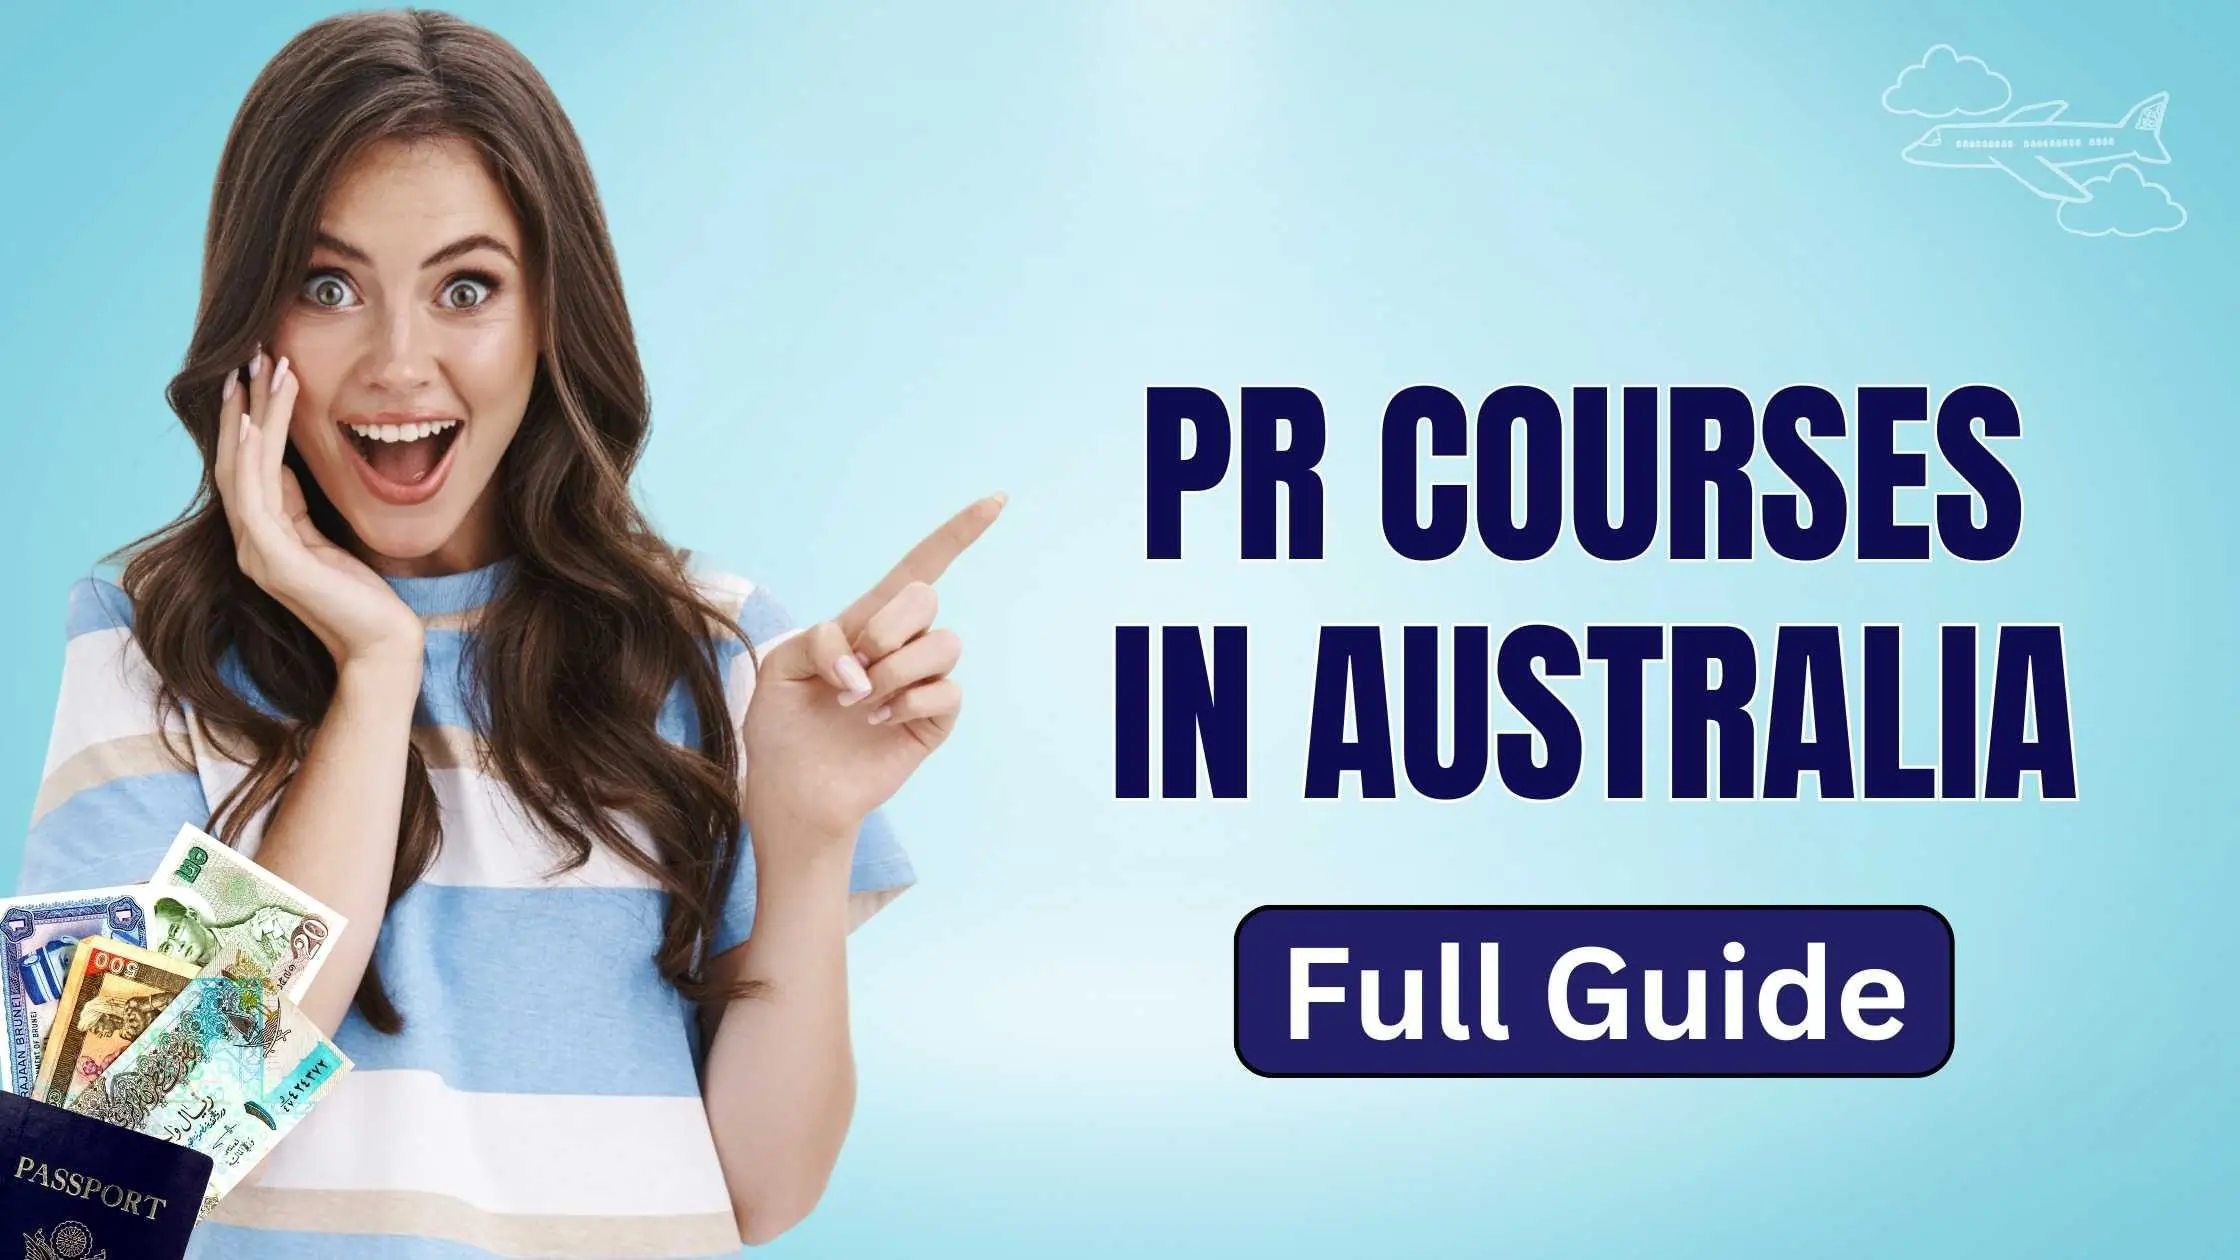 A girl points towards the popular PR Courses in Australia for International Students